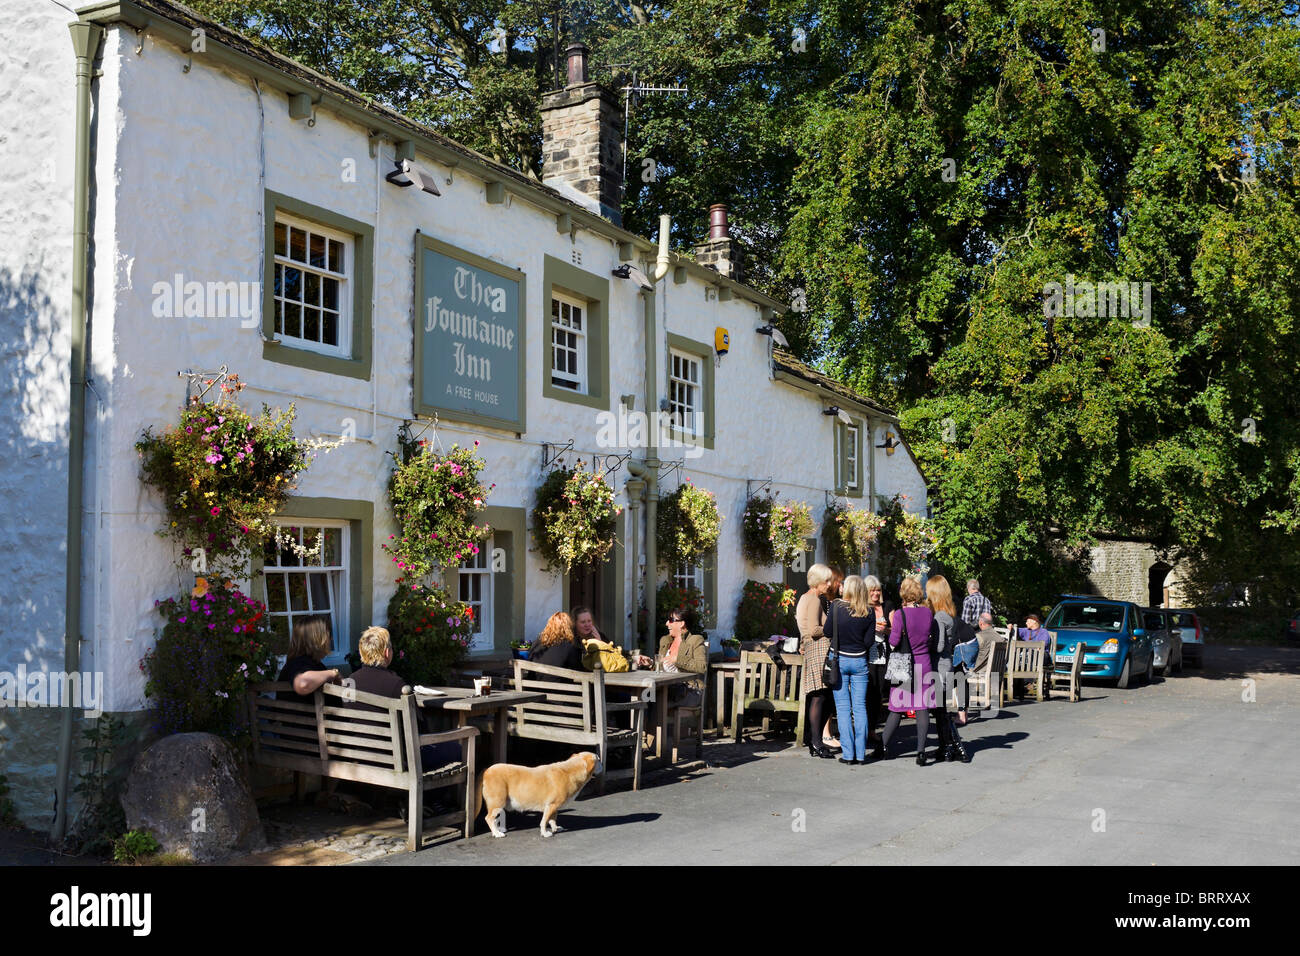 The Fountaine Inn pub on the village green in Linton, near Grassington, Upper Wharfedale, Yorkshire Dales, England, UK Stock Photo